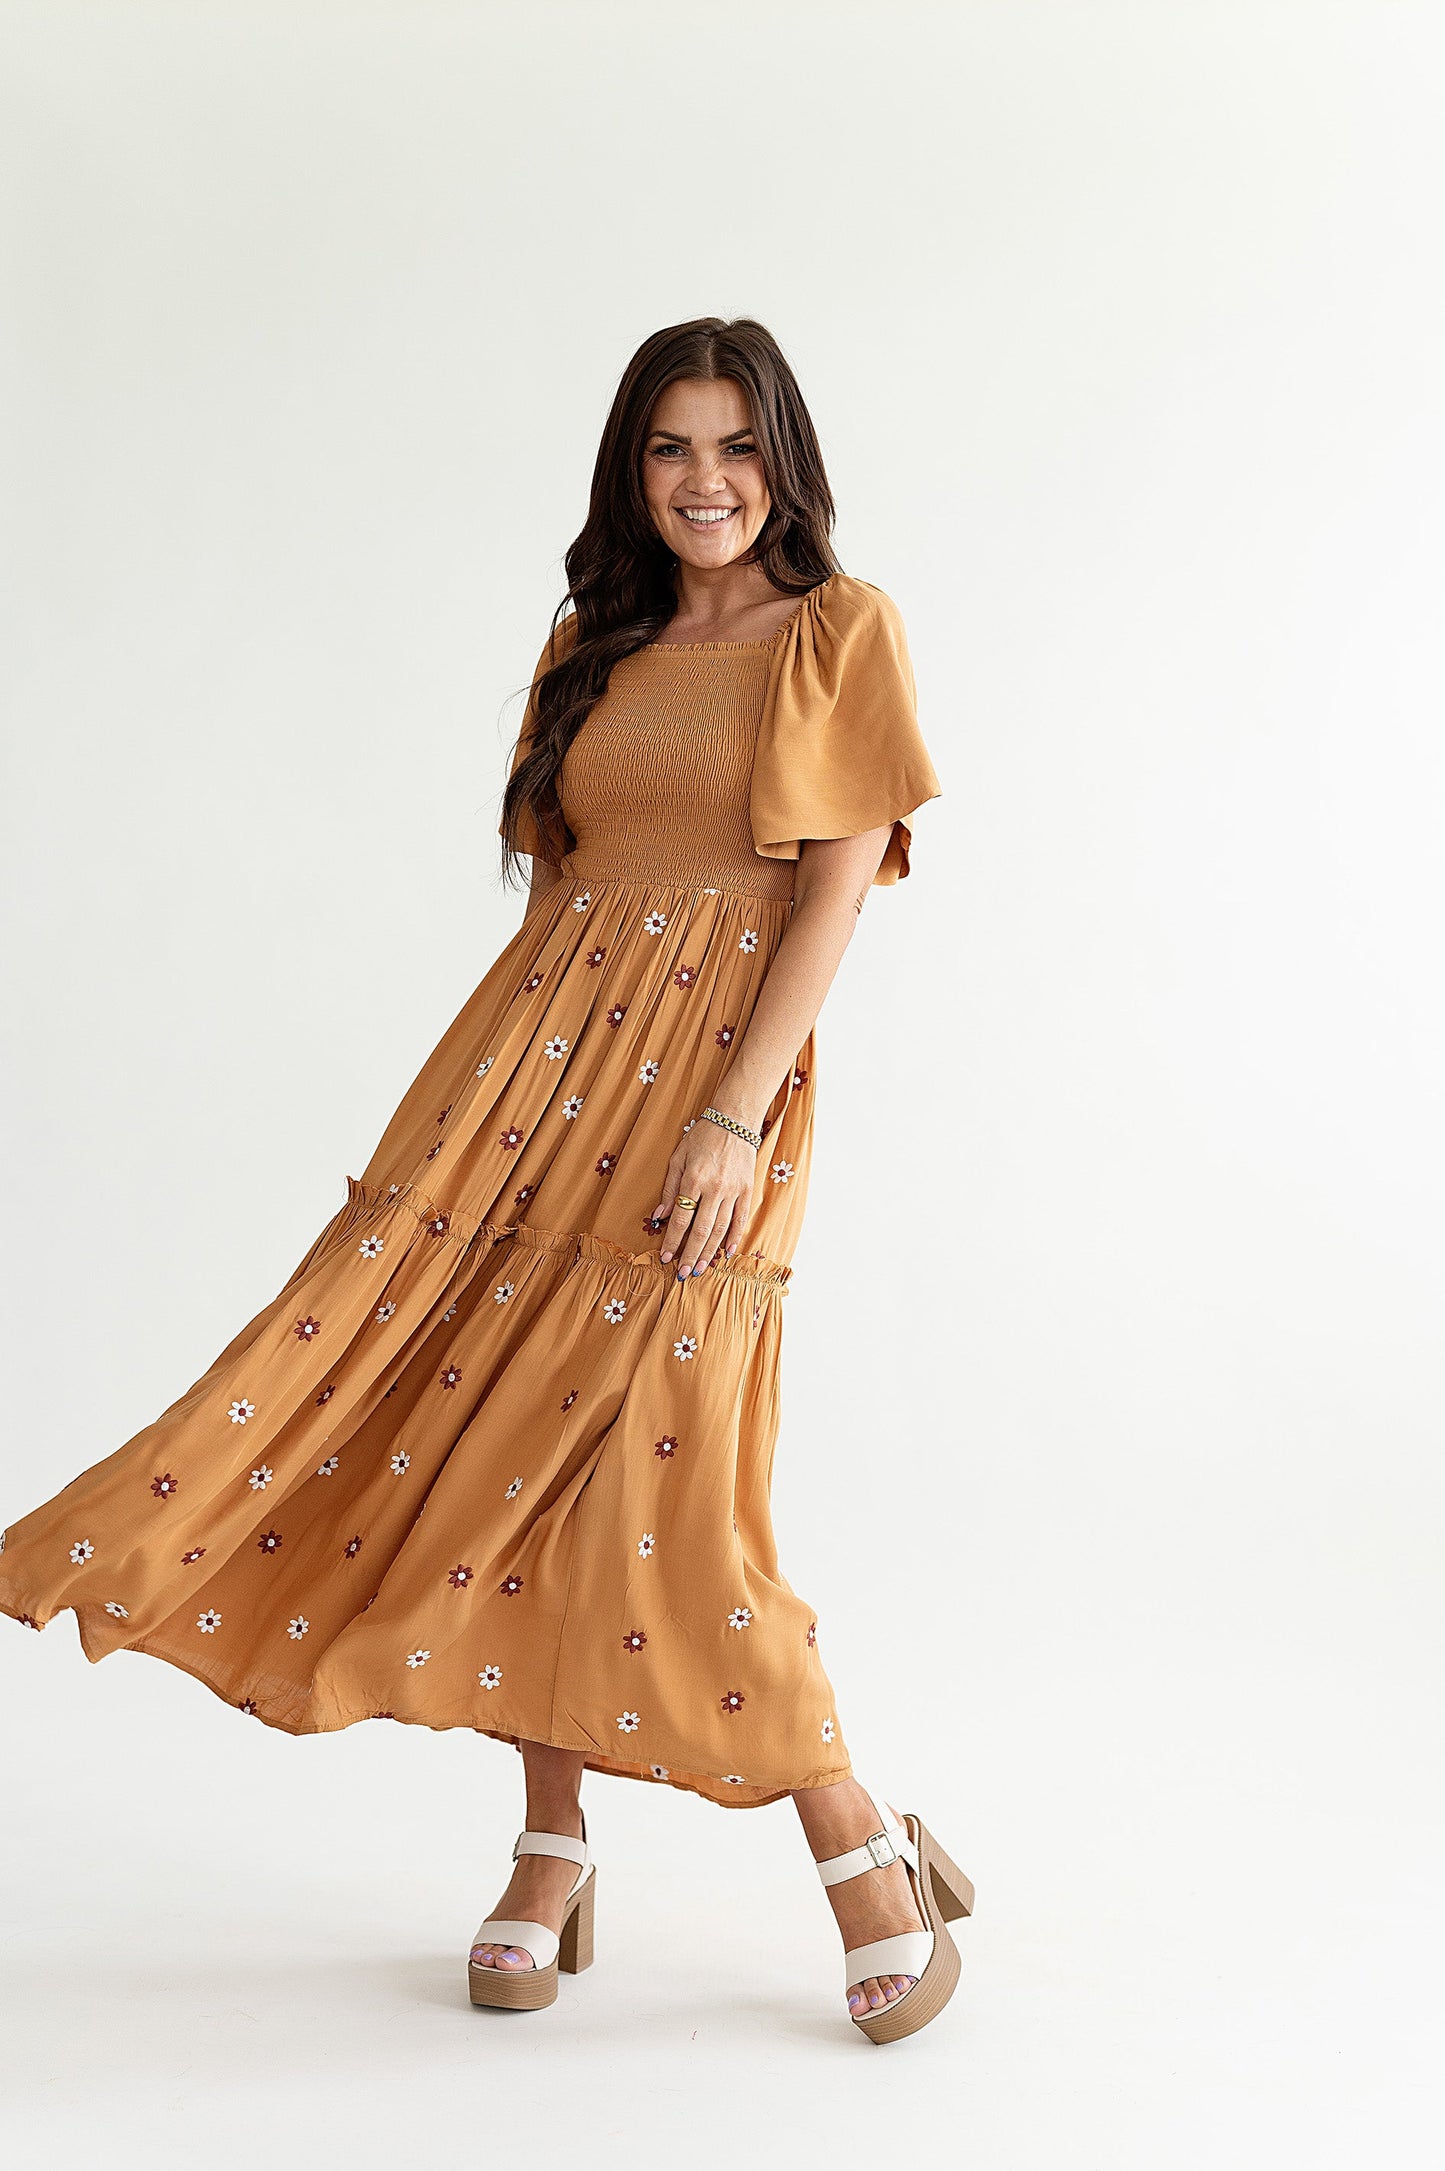 yayaq™-Clementine Embroidered Dress in Camel